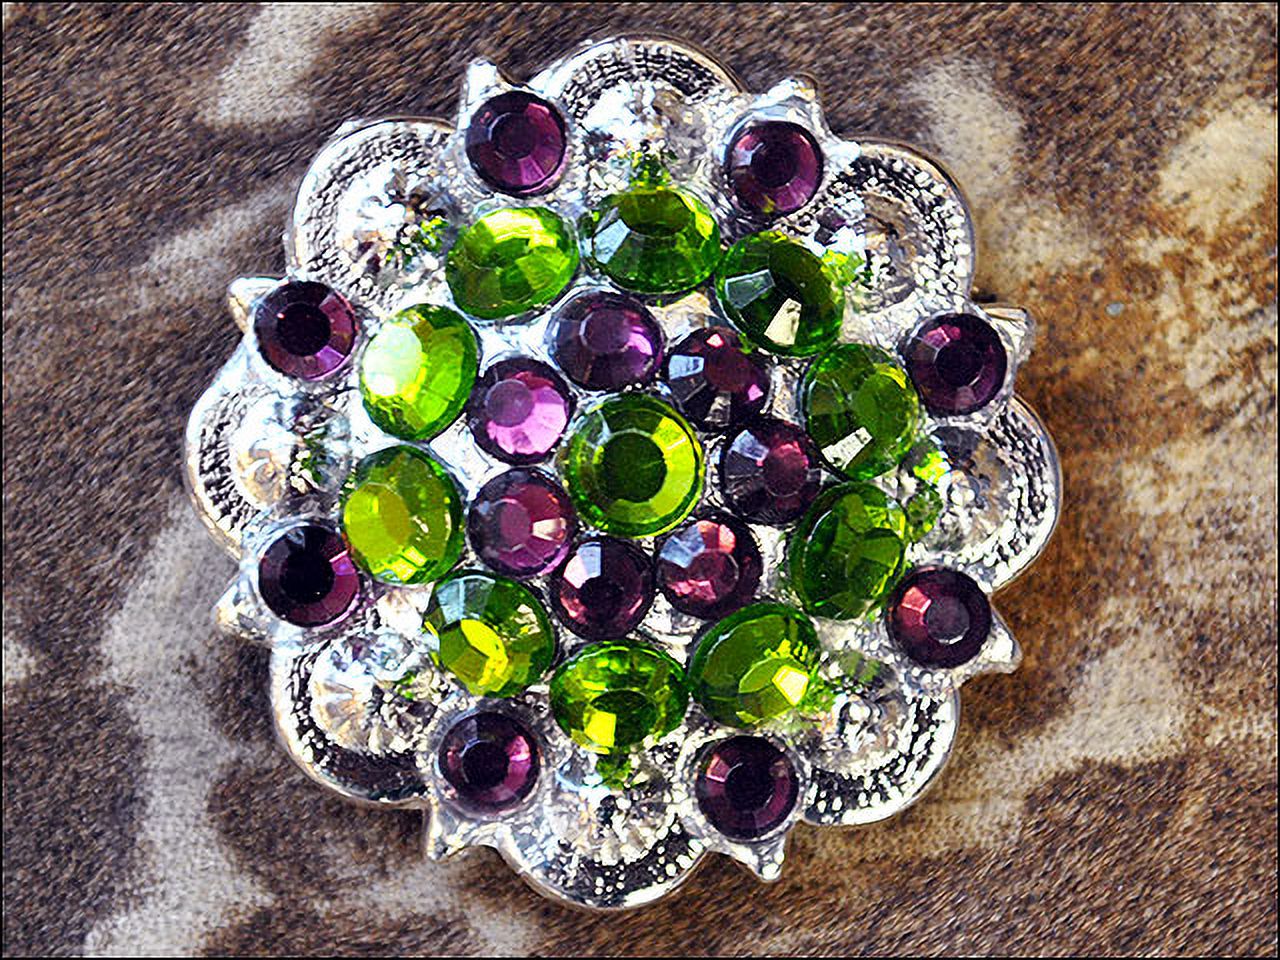 66HS Set Of 4 Screw Back Concho Peridot Amethyst Crystal 1-1/4In Saddle - image 2 of 7